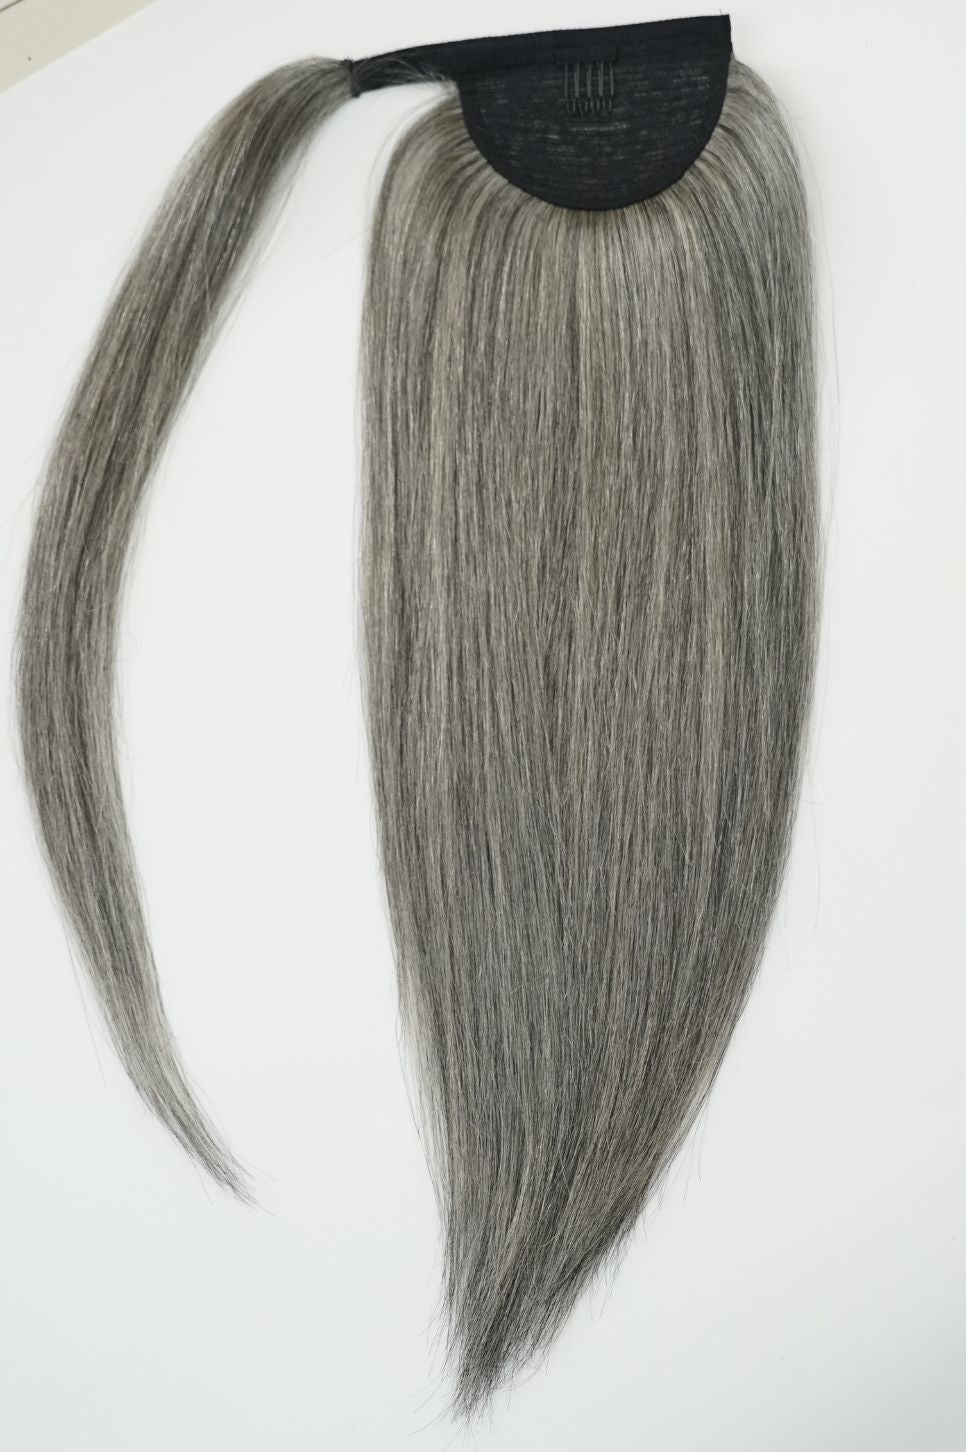 #Smokey Ombre Ponytail Extensions